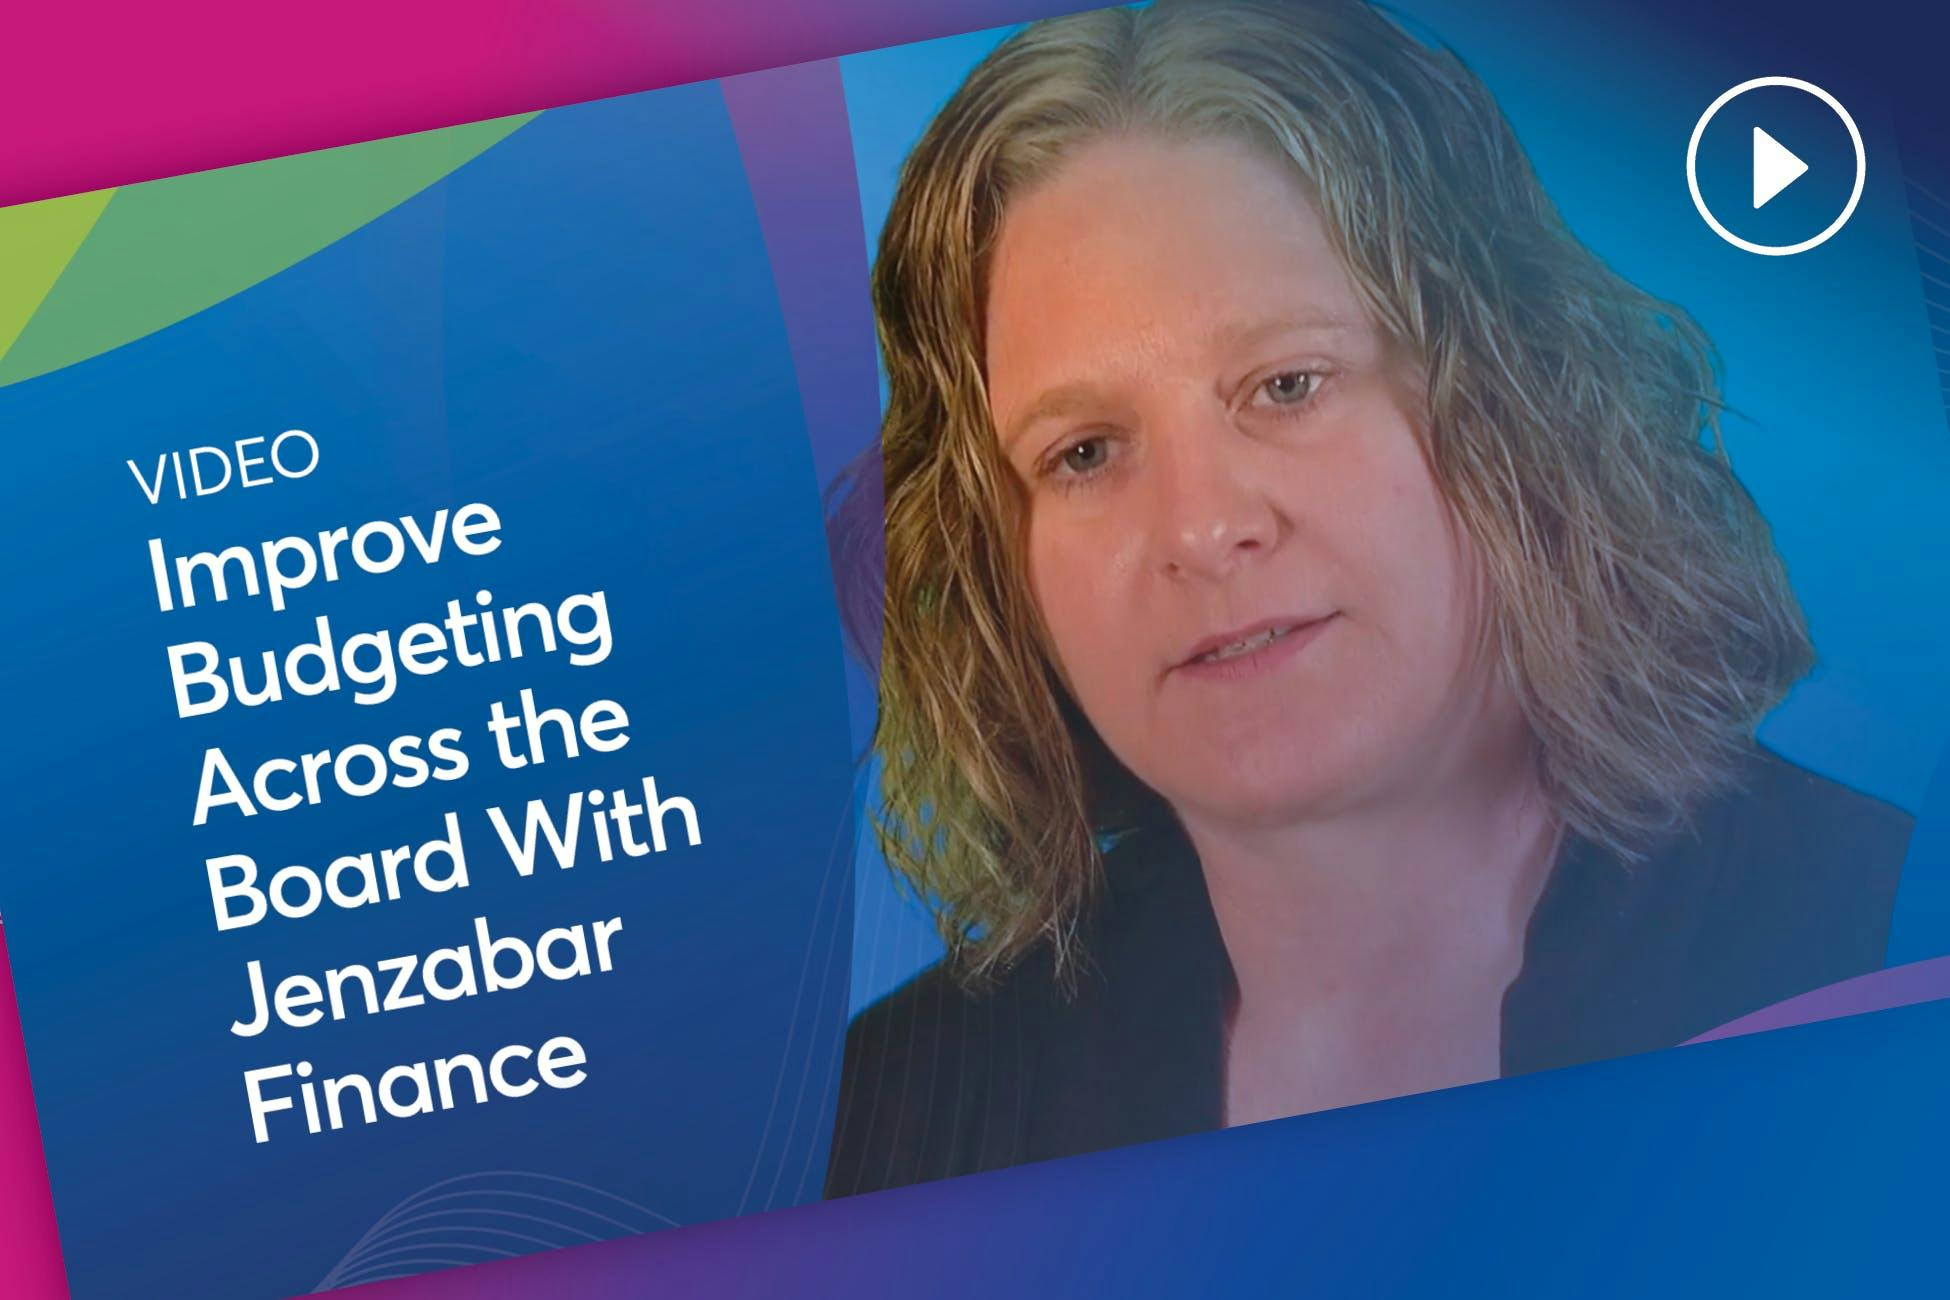 Video: Improve Budgeting Across the Board With Jenzabar Finance